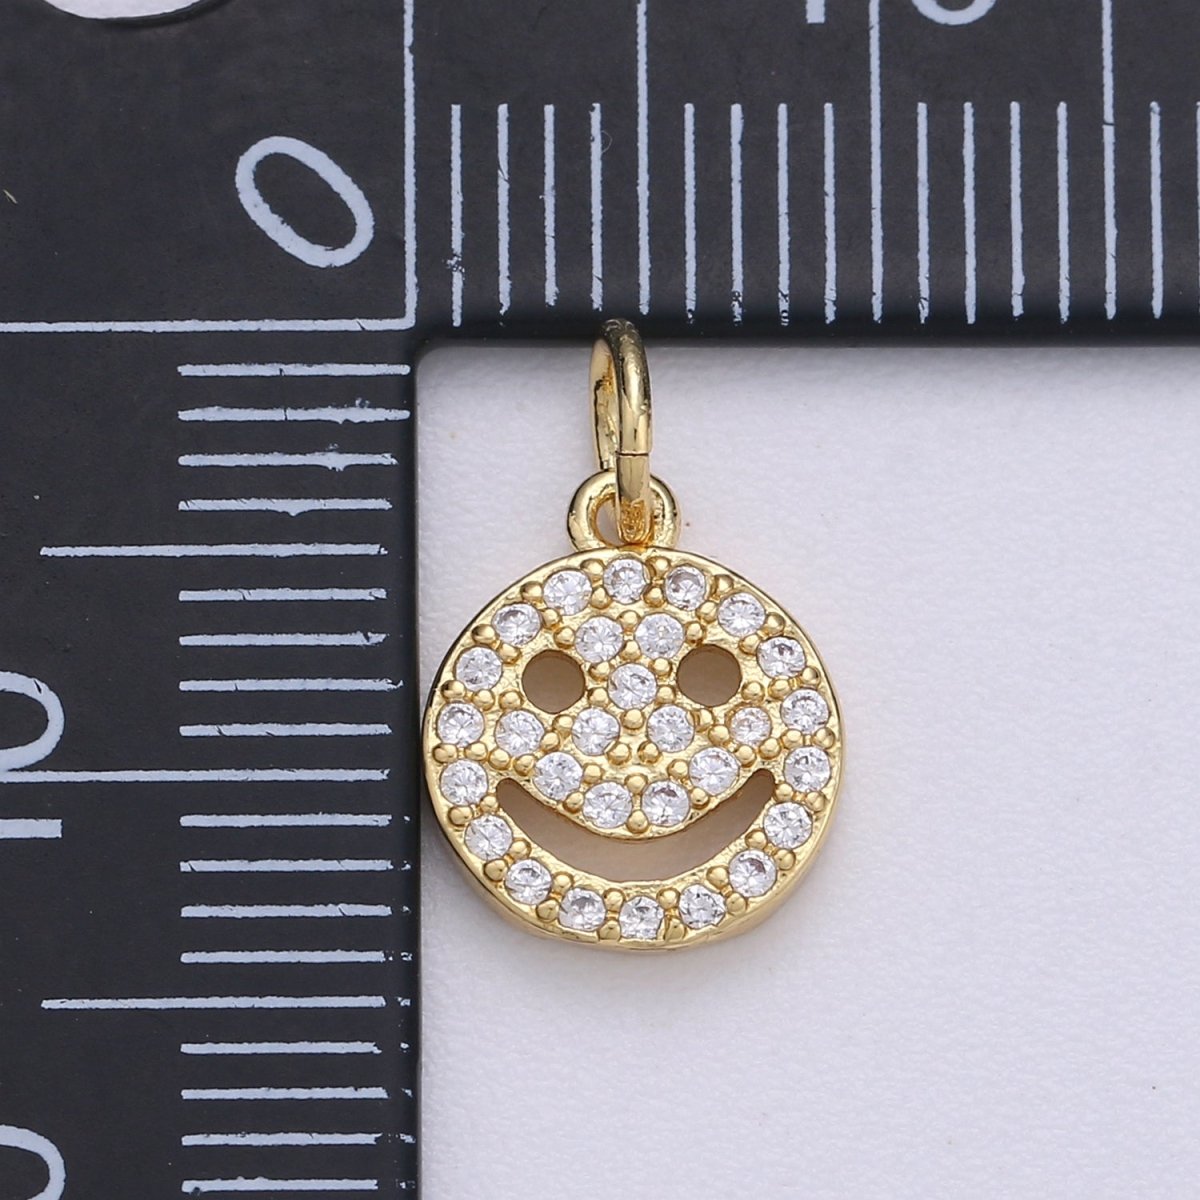 Micro Pave Charm Dainty Smile coin Mini Happy Smile pendant Gold Smiley Face 14k Gold Filled Emoji Charm Bracelet Earring Necklace Component D-667 - DLUXCA